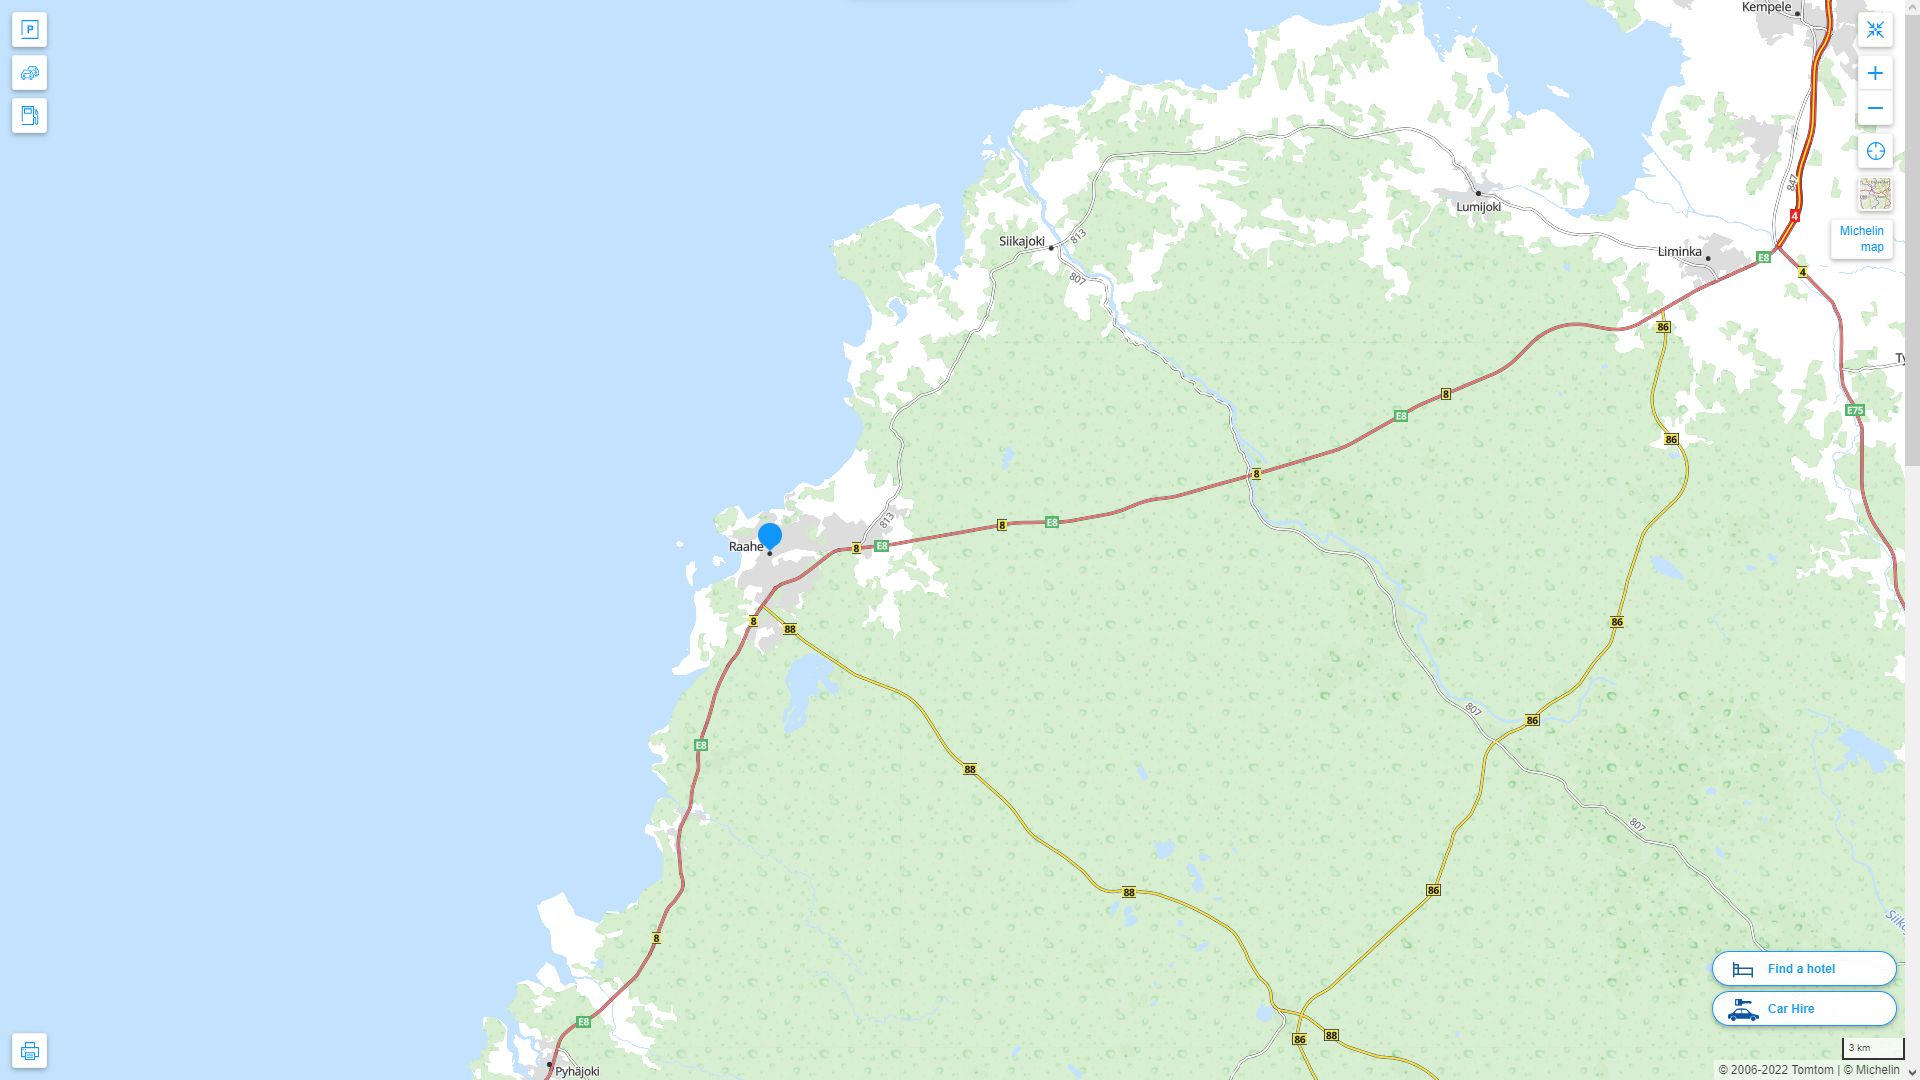 Raahe Highway and Road Map